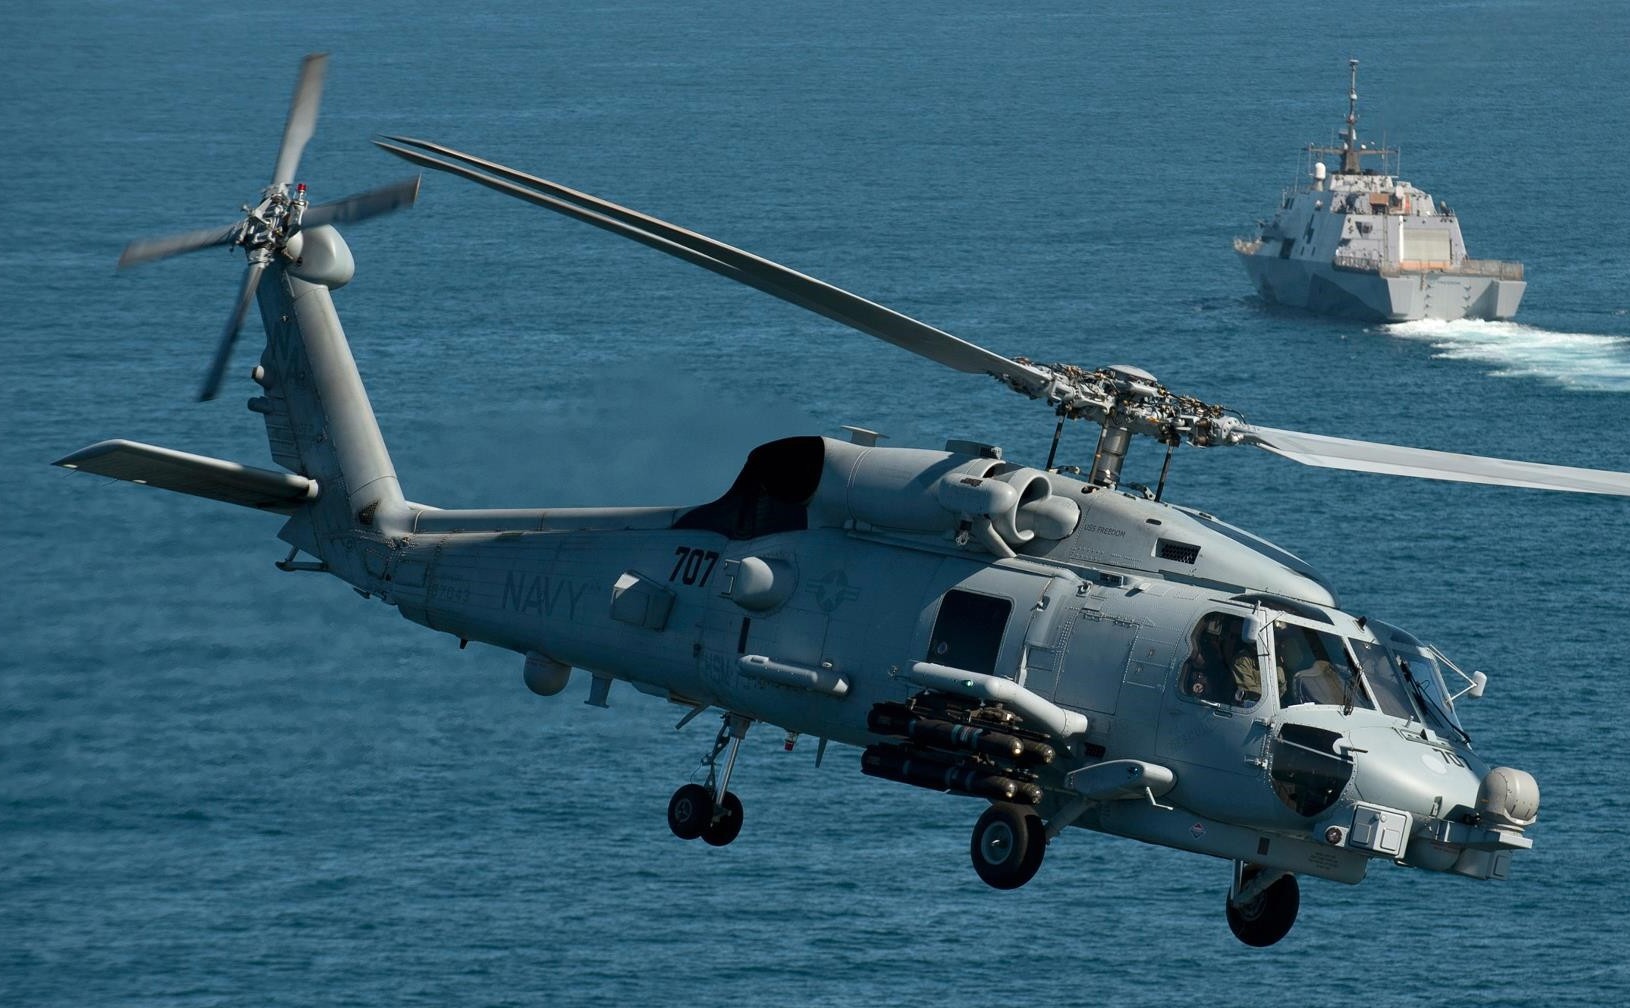 hsm-73 battlecats helicopter maritime strike squadron us navy mh-60r seahawk 2013 91